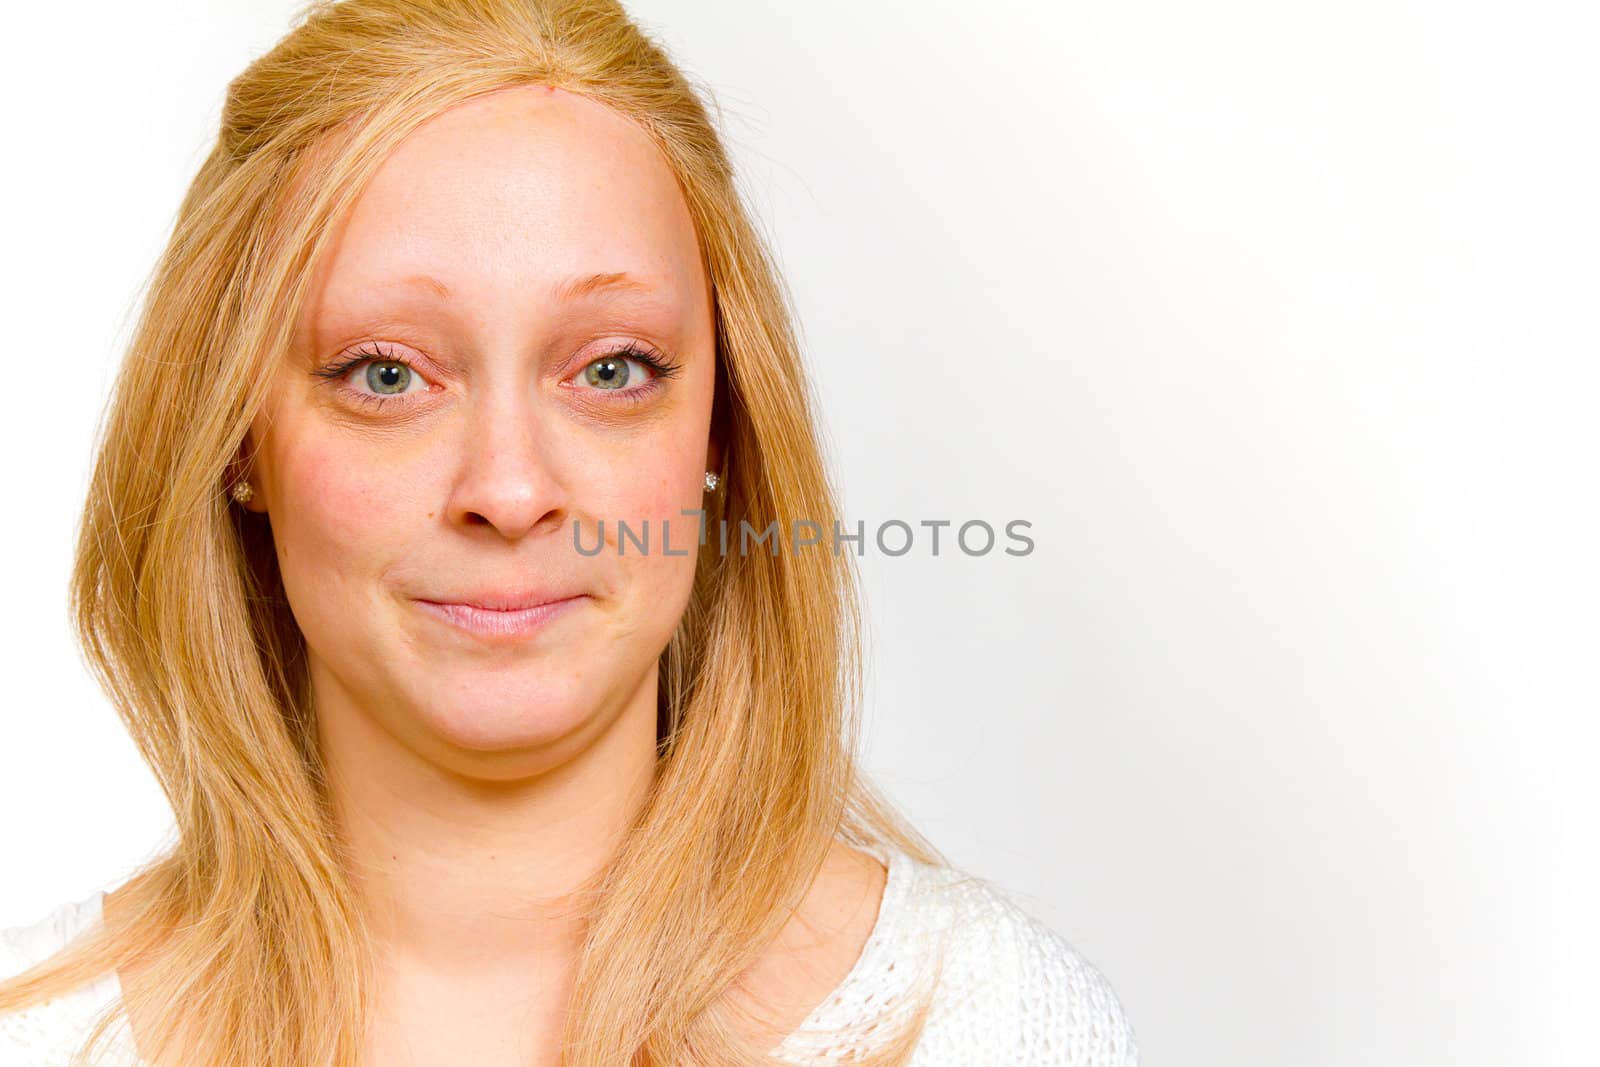 An attractive girl is photographed in the studio with a white background for this portrait.